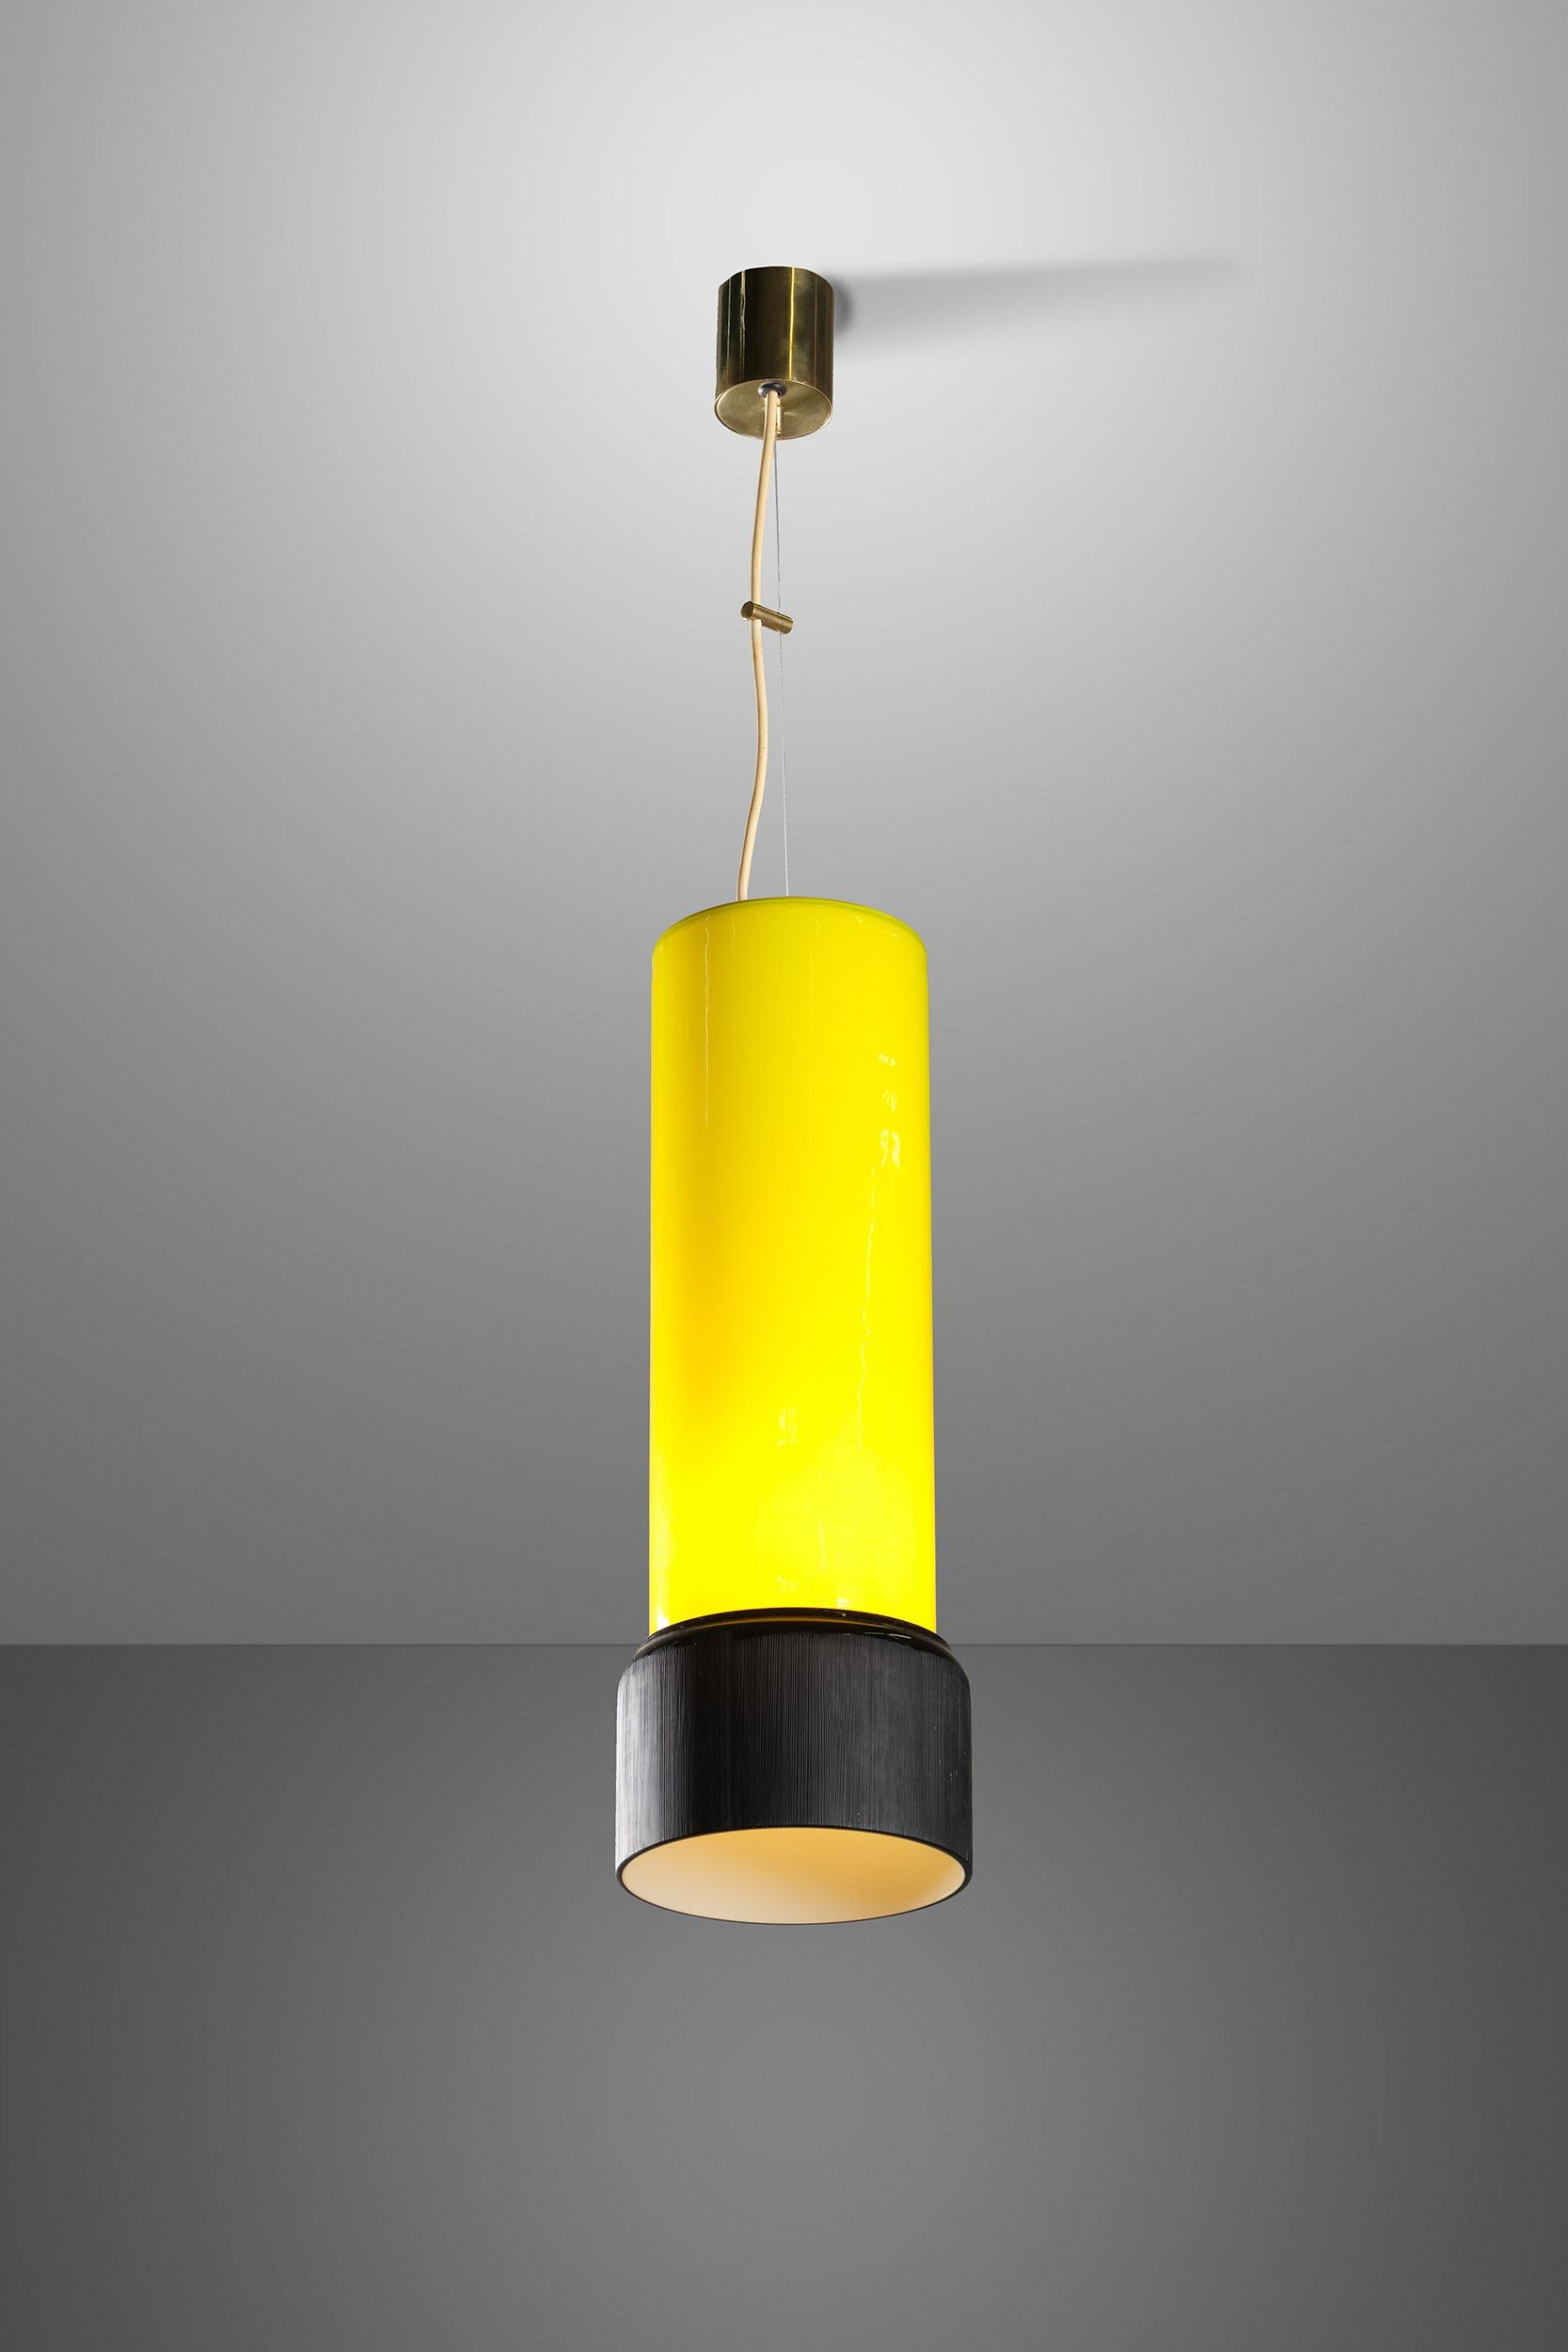 Wonderful Stilnovo pendant with yellow and black glass diffuser and original decal from the 1950s. With its tubular brass structure and exceptionally elegant coloured glass, this item will add an extra touch of refinement to your interiors.